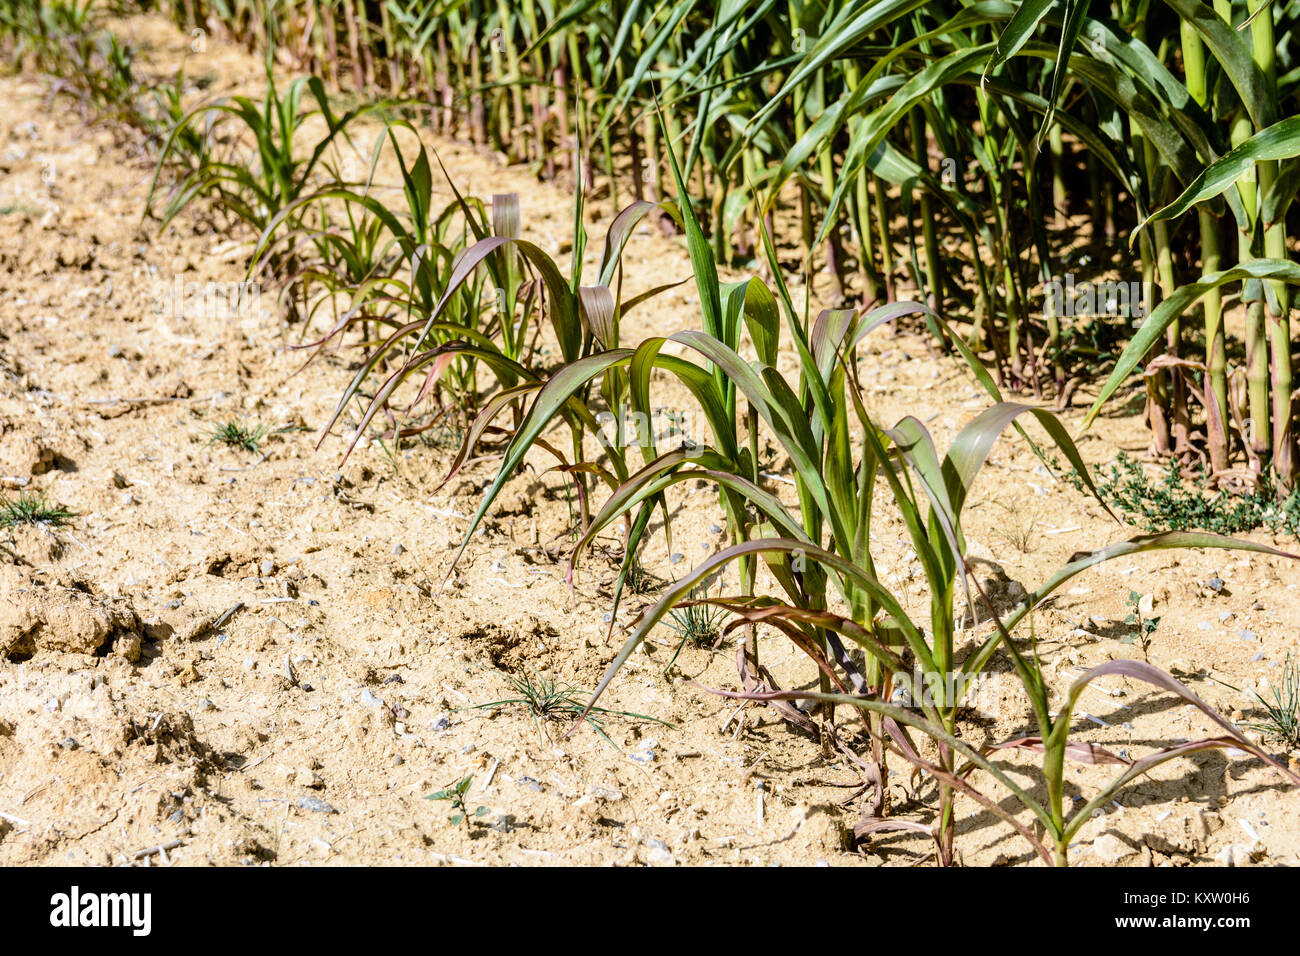 Poorly developed row of corn in a dry land. Stock Photo